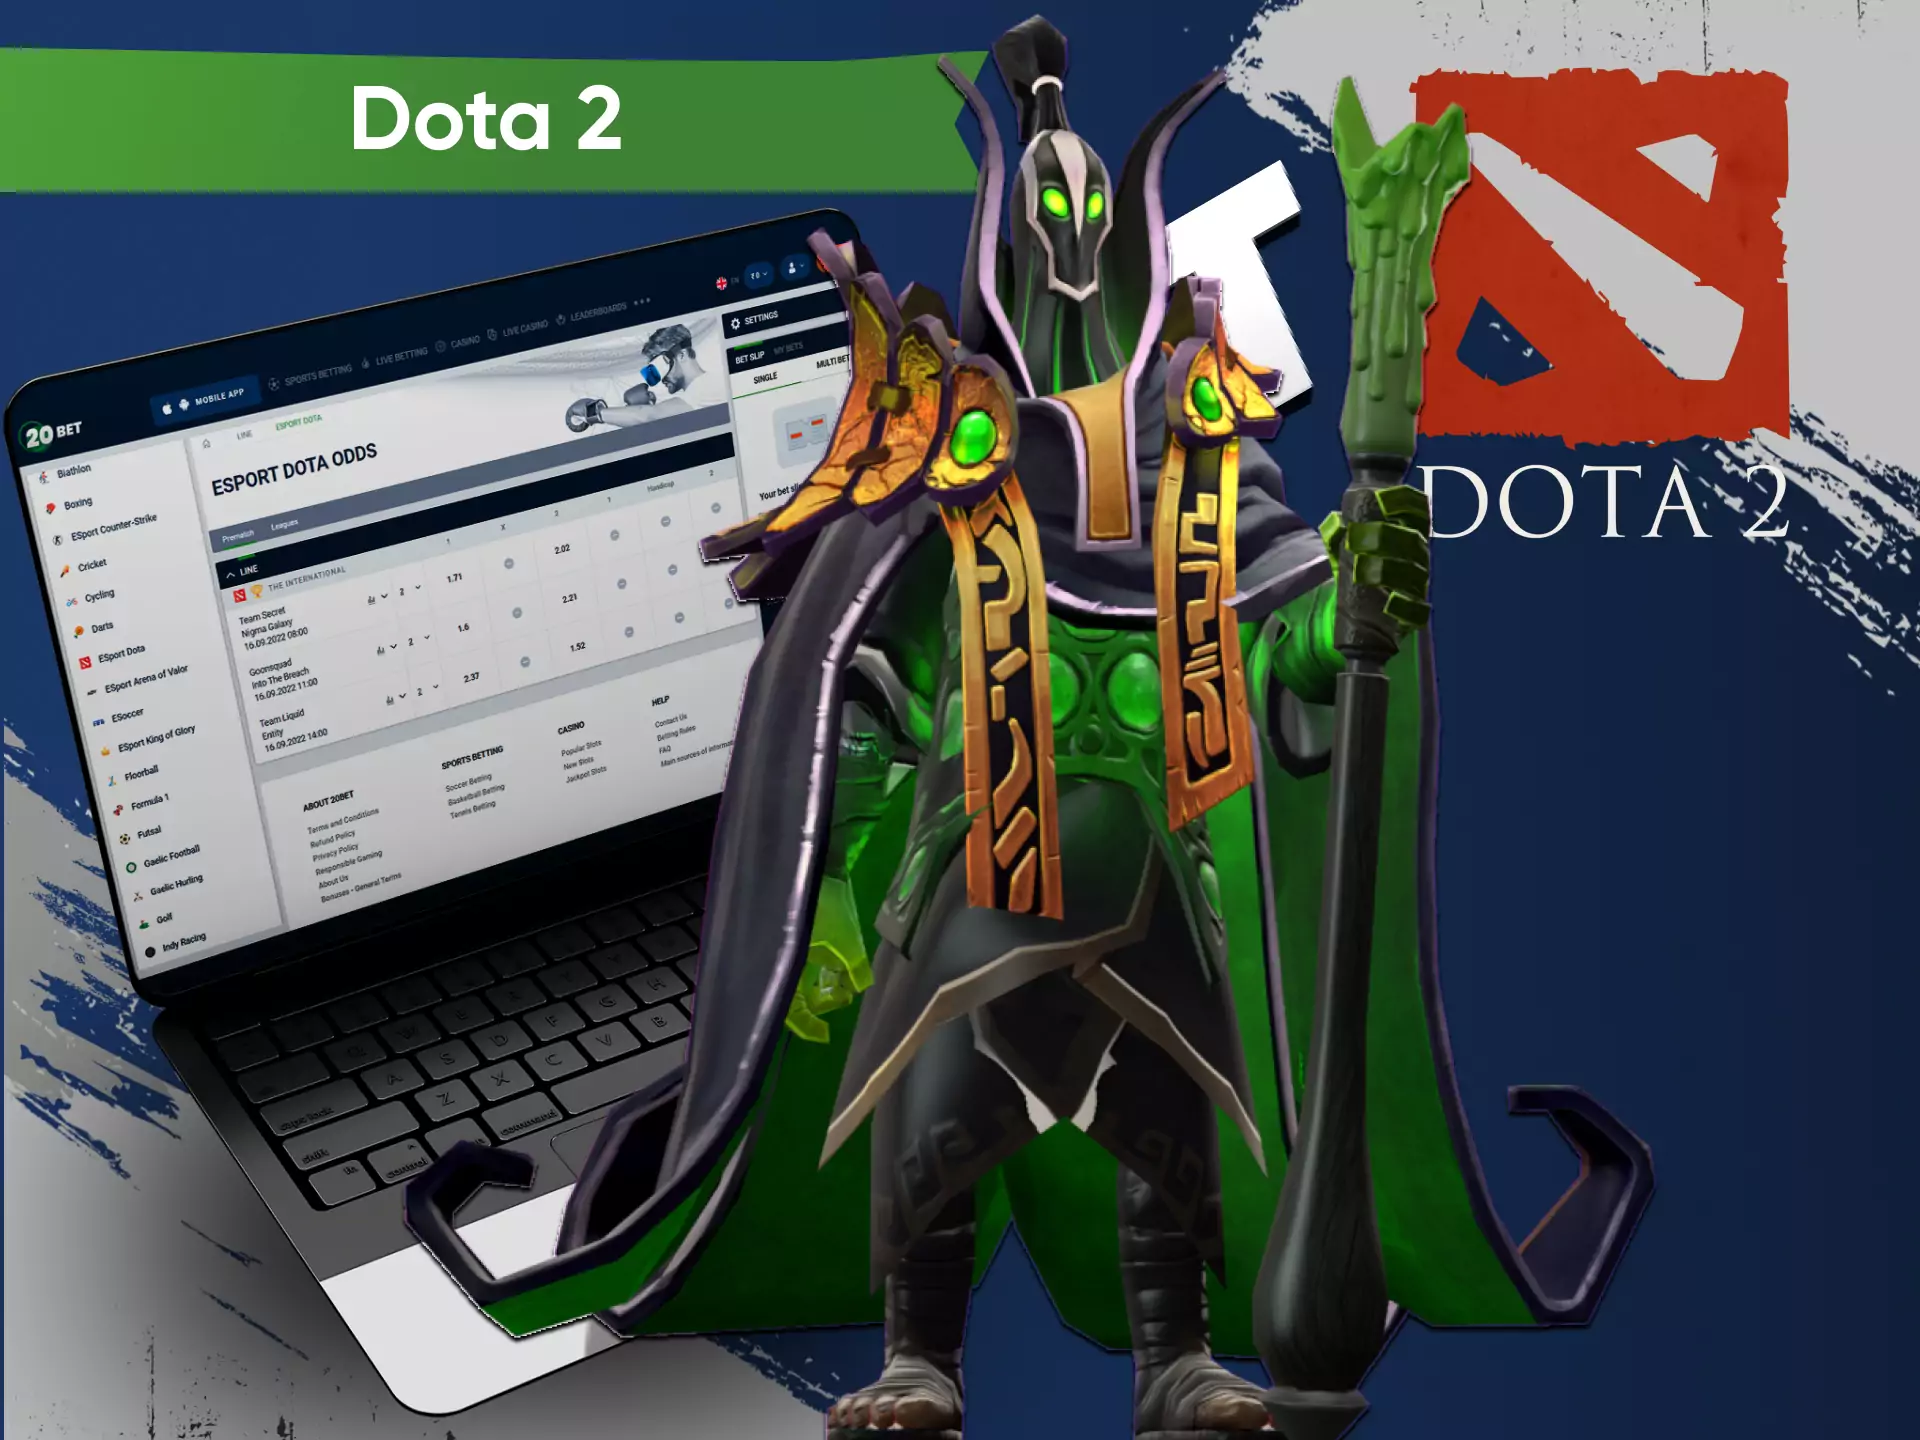 In the esports section of 20bet, you find lots of Dota 2 matches available for betting.